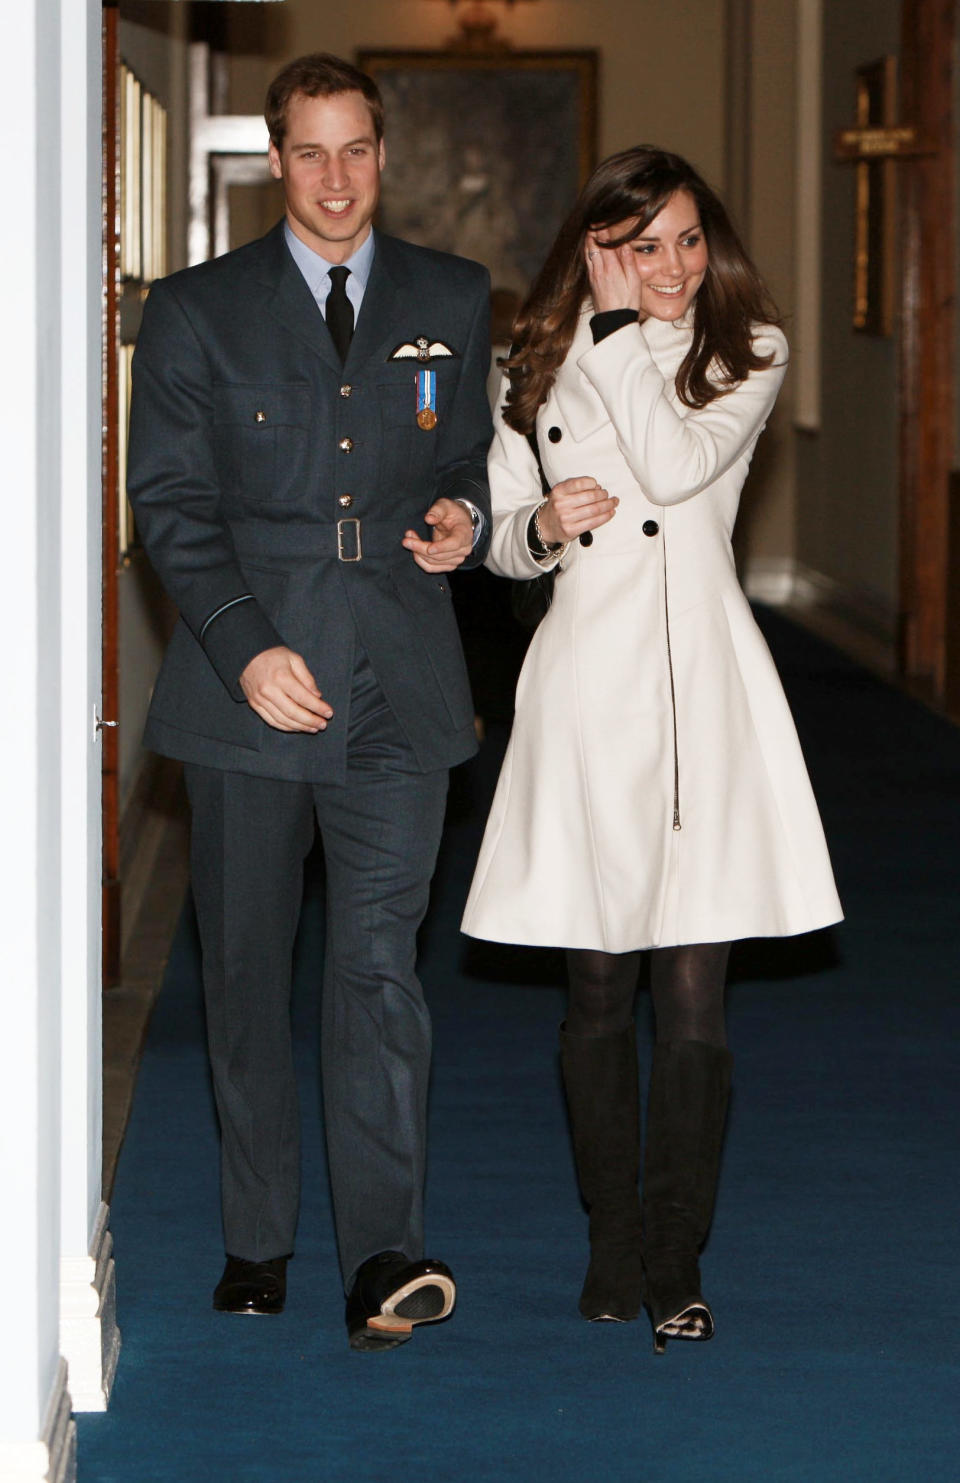 Kate Middleton at the Central Flying School at RAF Cranwell in 2011 (Getty Images)